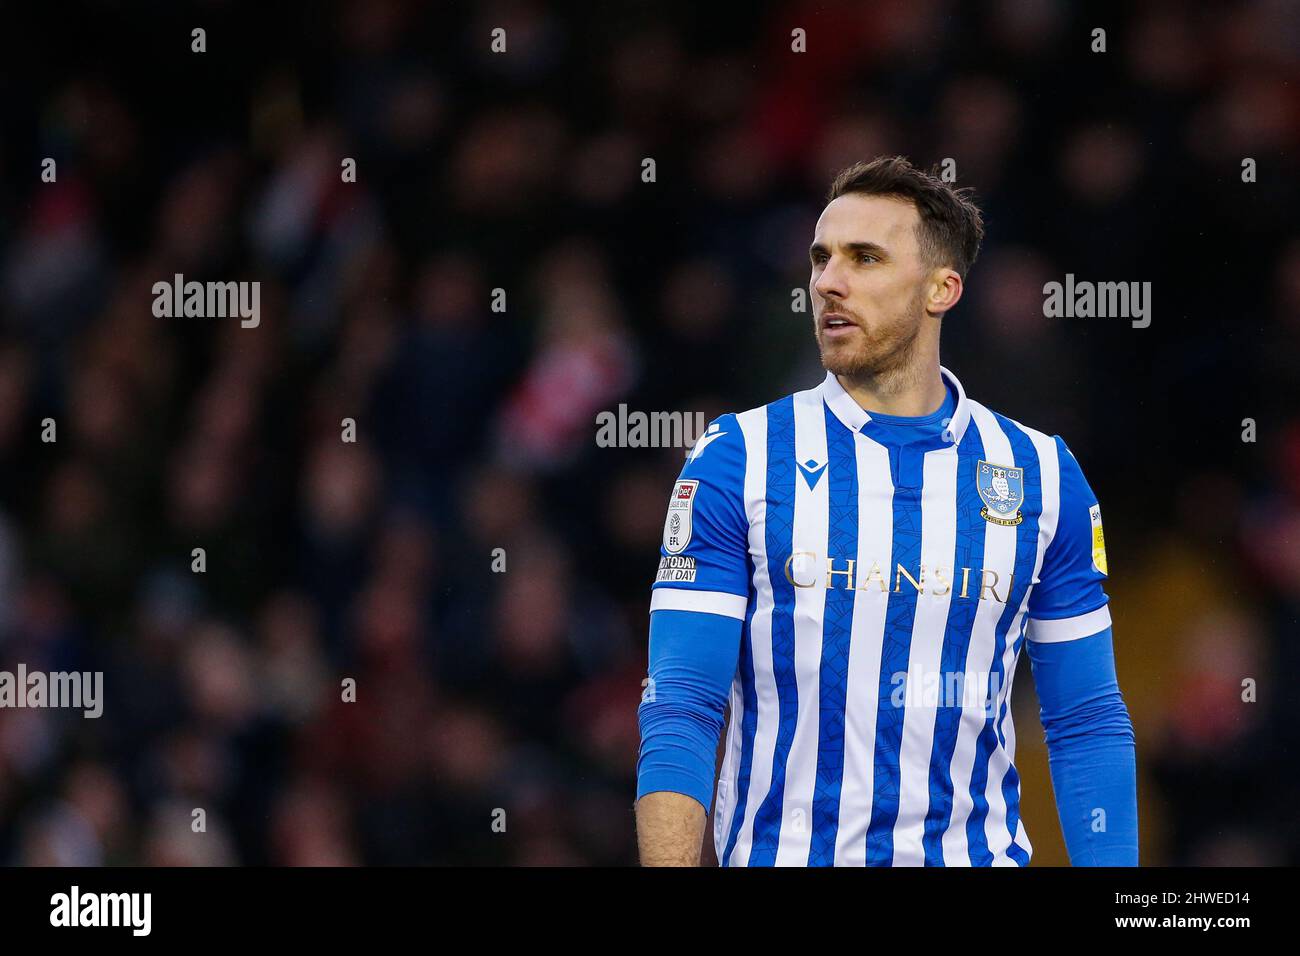 Lincoln Grossbritannien 05 Marz 22 Lee Gregory 9 Of Sheffield Wednesday In Lincoln Vereinigtes Konigreich Am 3 5 22 Foto Von Ben Early News Images Sipa Usa Quelle Sipa Usa Alamy Live News Stockfotografie Alamy